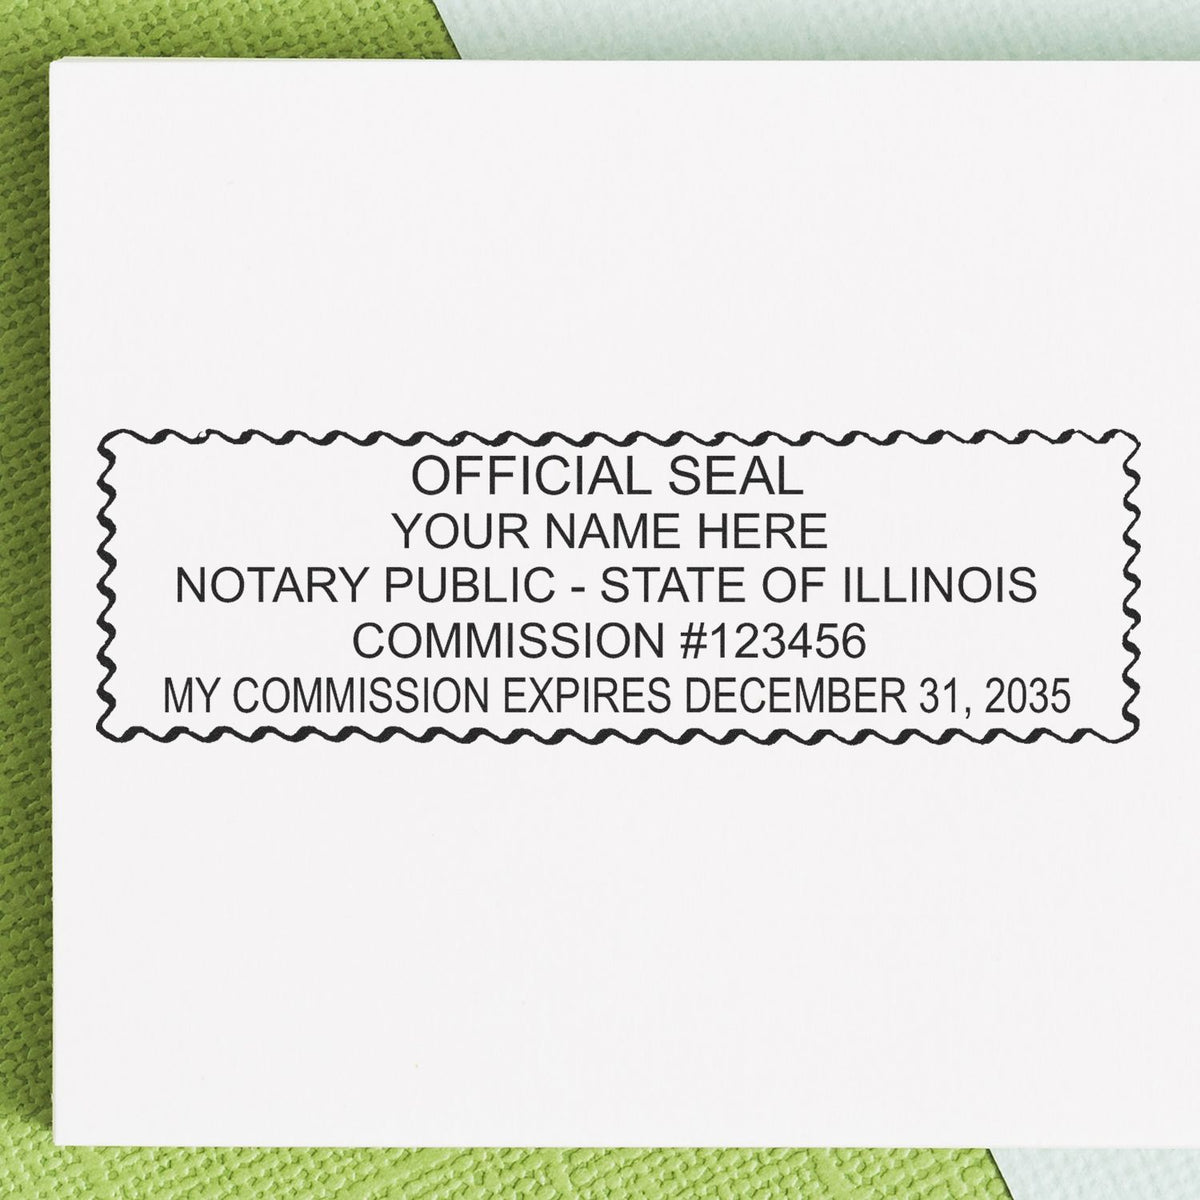 A stamped impression of the MaxLight Premium Pre-Inked Illinois Rectangular Notarial Stamp in this stylish lifestyle photo, setting the tone for a unique and personalized product.